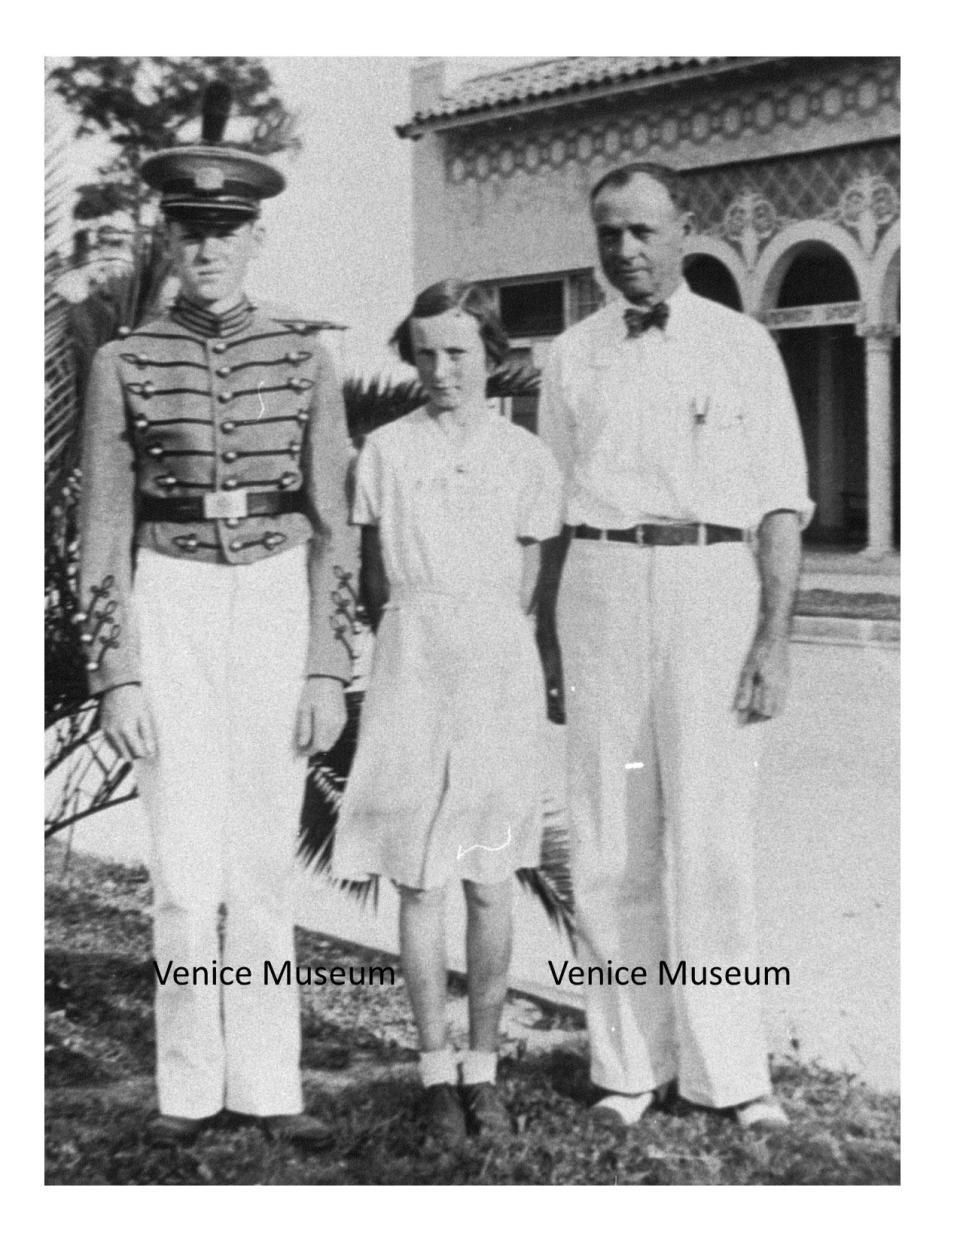 A young Julia Cousins poses with her older brother Jimmy in his Kentucky Military Institute uniform and their father Mitt Cousins.